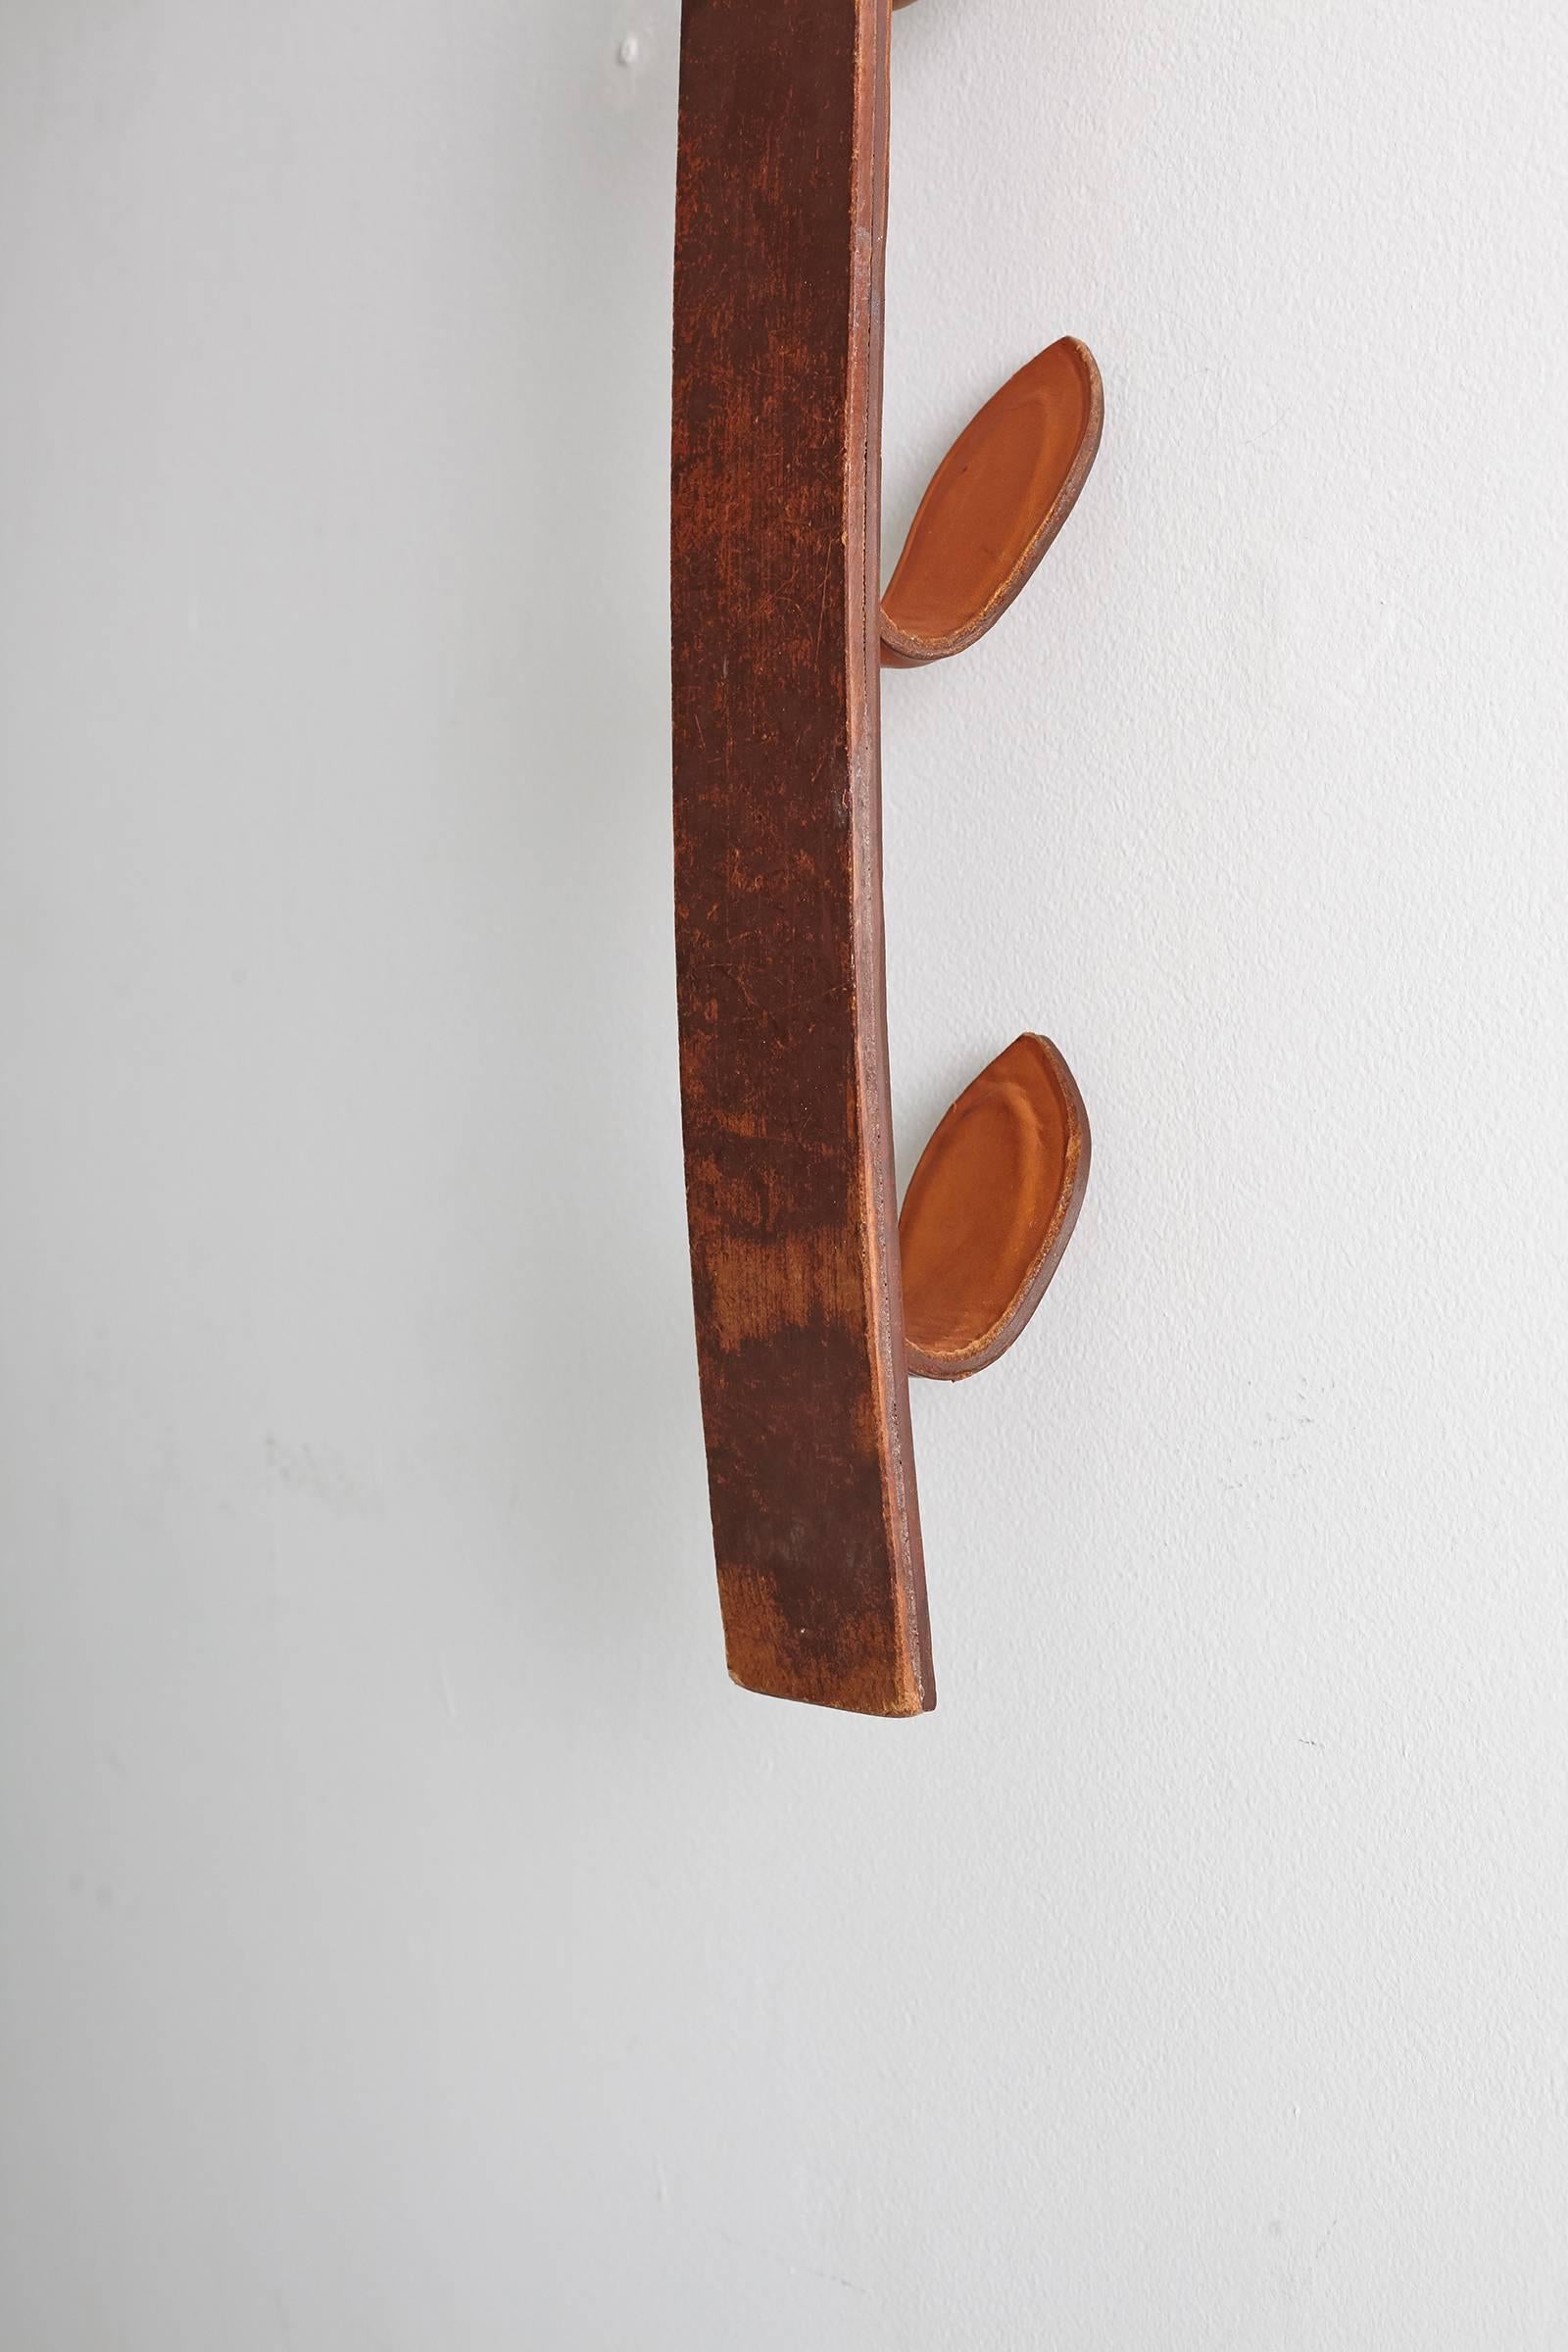 Jacques Adnet Leather Set of Three Wall Hooks 1